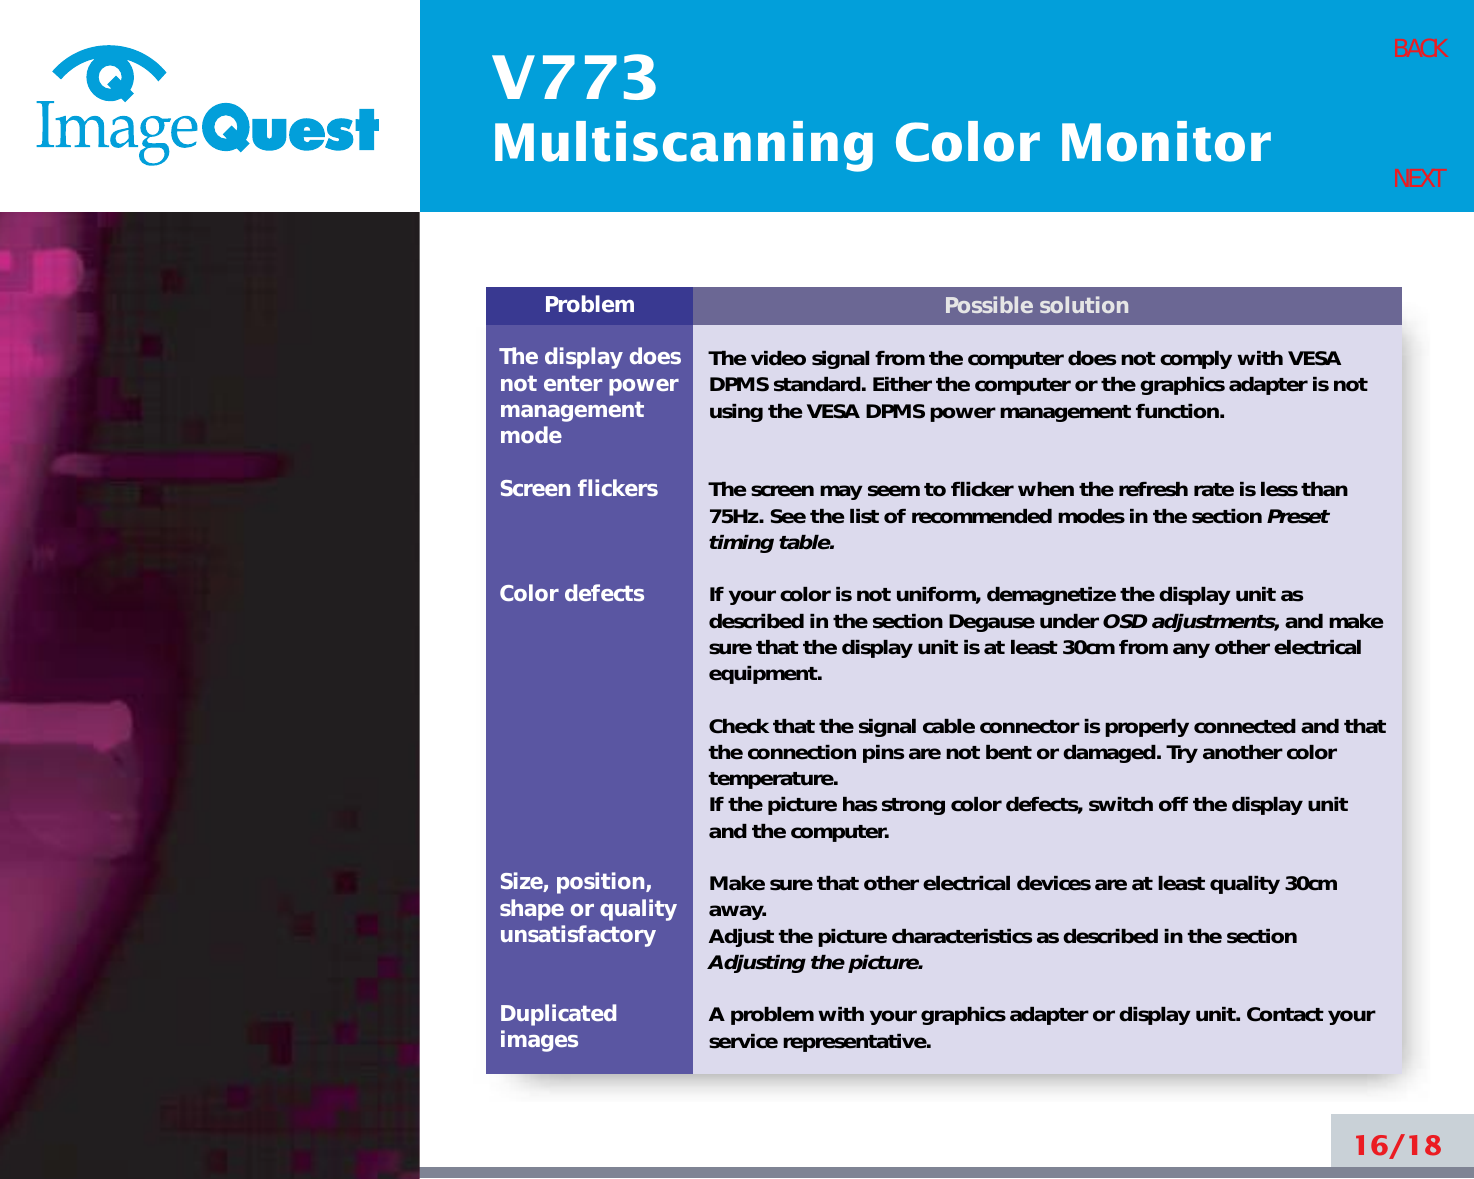 V773Multiscanning Color Monitor16/18BACKNEXTPossible solutionThe video signal from the computer does not comply with VESADPMS standard. Either the computer or the graphics adapter is notusing the VESA DPMS power management function.The screen may seem to flicker when the refresh rate is less than75Hz. See the list of recommended modes in the section Presettiming table.If your color is not uniform, demagnetize the display unit asdescribed in the section Degause under OSD adjustments, and makesure that the display unit is at least 30cm from any other electricalequipment.Check that the signal cable connector is properly connected and thatthe connection pins are not bent or damaged. Try another colortemperature. If the picture has strong color defects, switch off the display unitand the computer.Make sure that other electrical devices are at least quality 30cmaway.Adjust the picture characteristics as described in the sectionAdjusting the picture.A problem with your graphics adapter or display unit. Contact yourservice representative.ProblemThe display does not enter power managementmodeScreen flickersColor defectsSize, position,shape or qualityunsatisfactoryDuplicatedimages